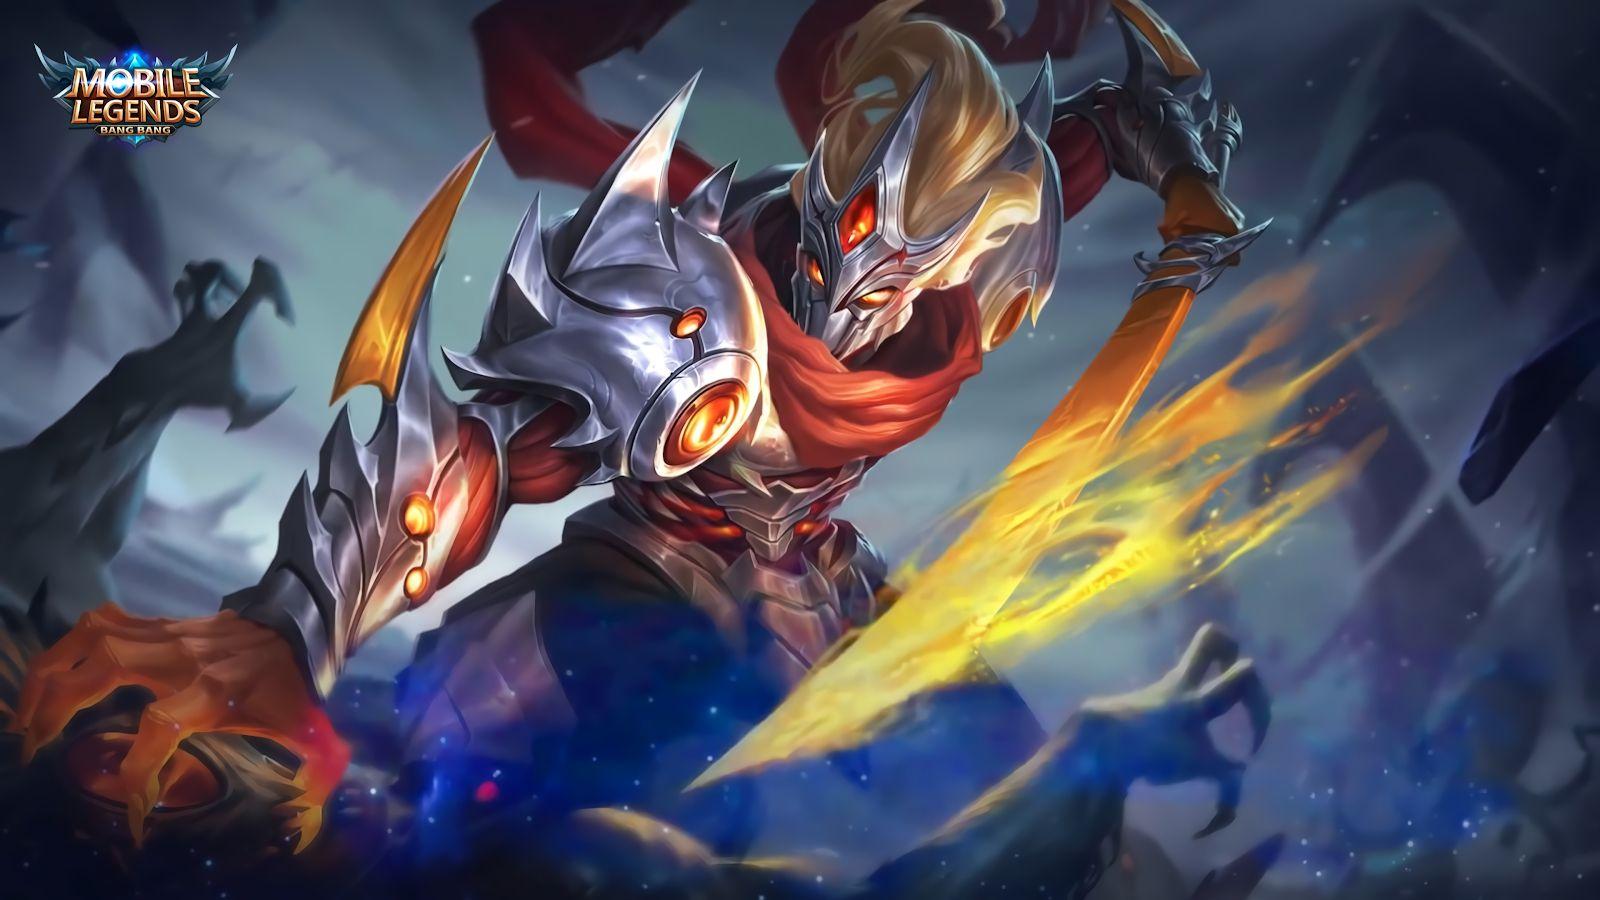 Mobile Legends Characters & Skins - ☬Experiment 21